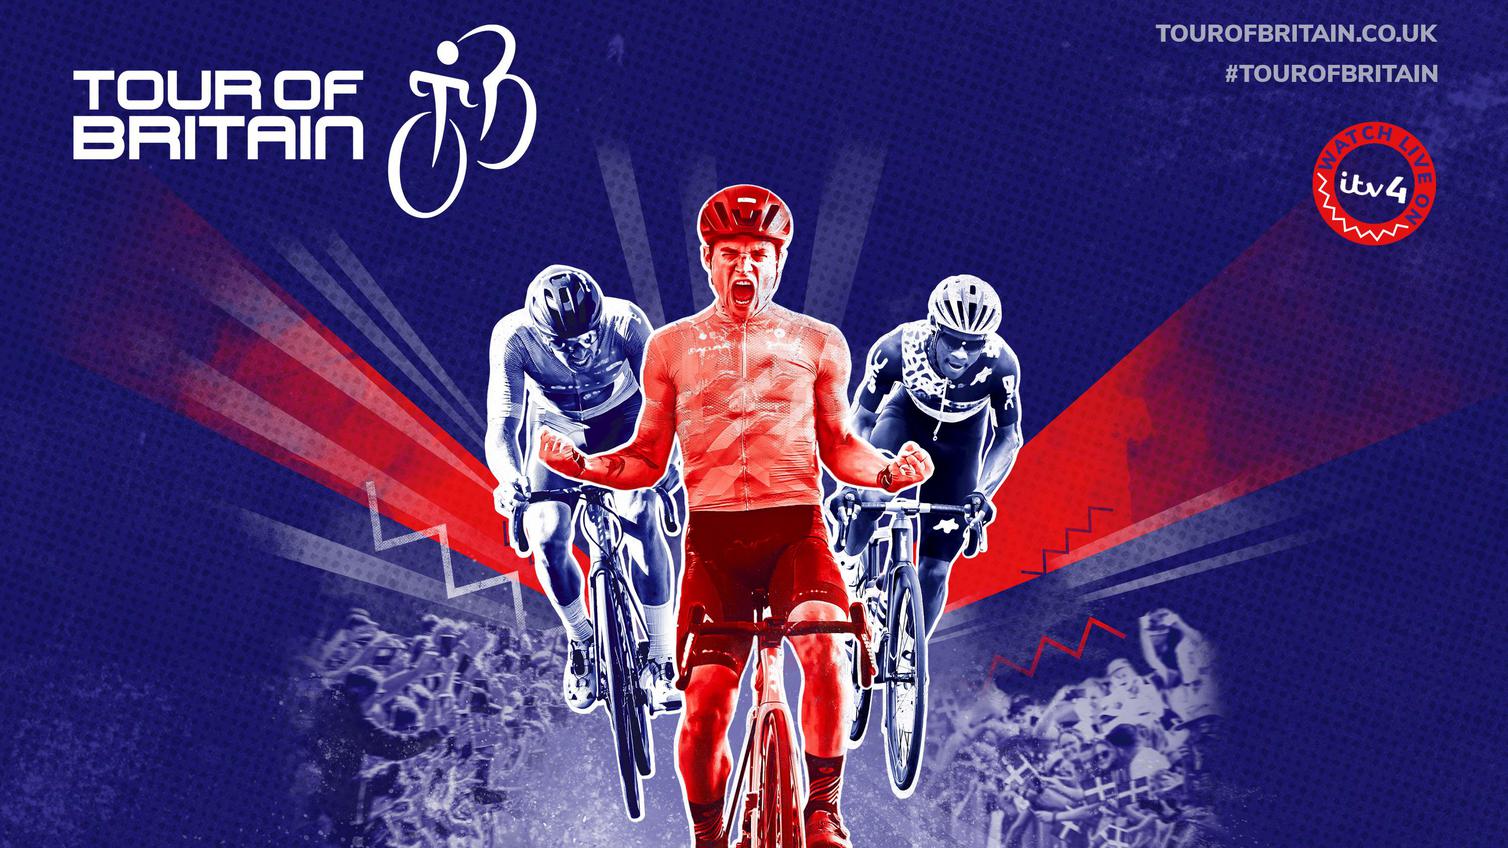 The poster for the Howdens Stage of the Tour of Britain